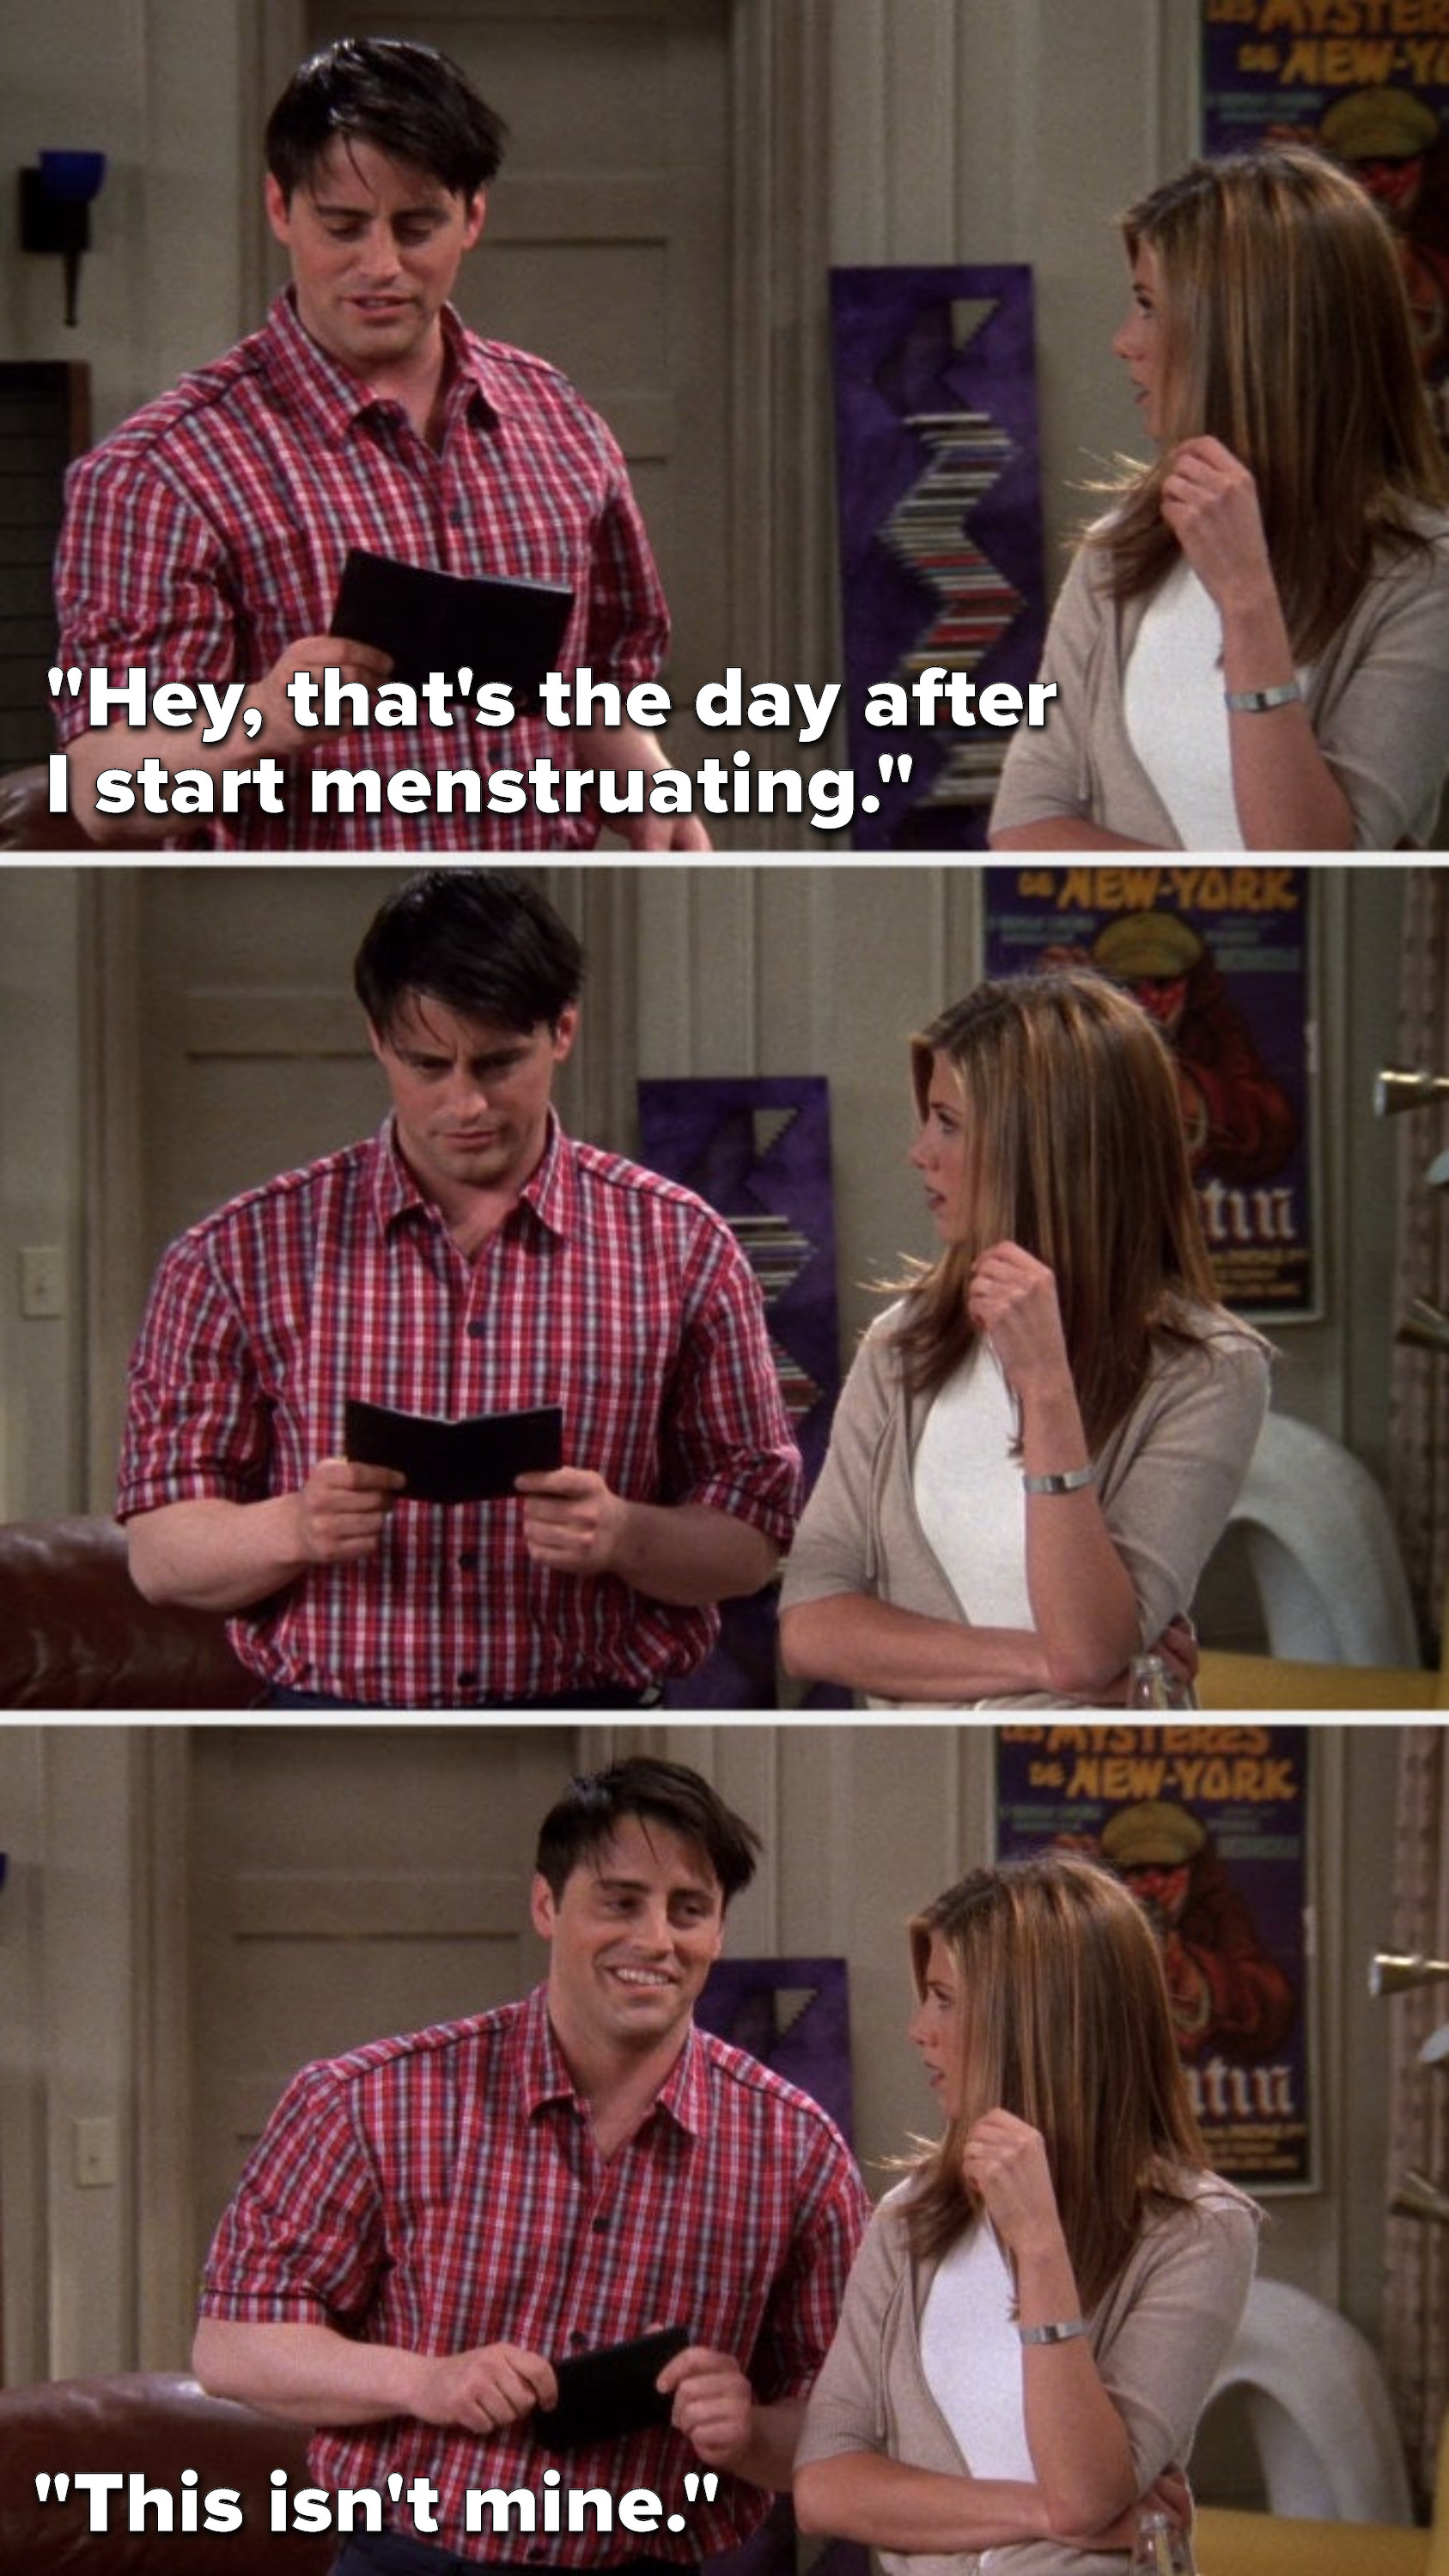 Joey says, &quot;Hey, that&#x27;s the day after I start menstruating,&quot; pauses, then says, &quot;This isn&#x27;t mine&quot;